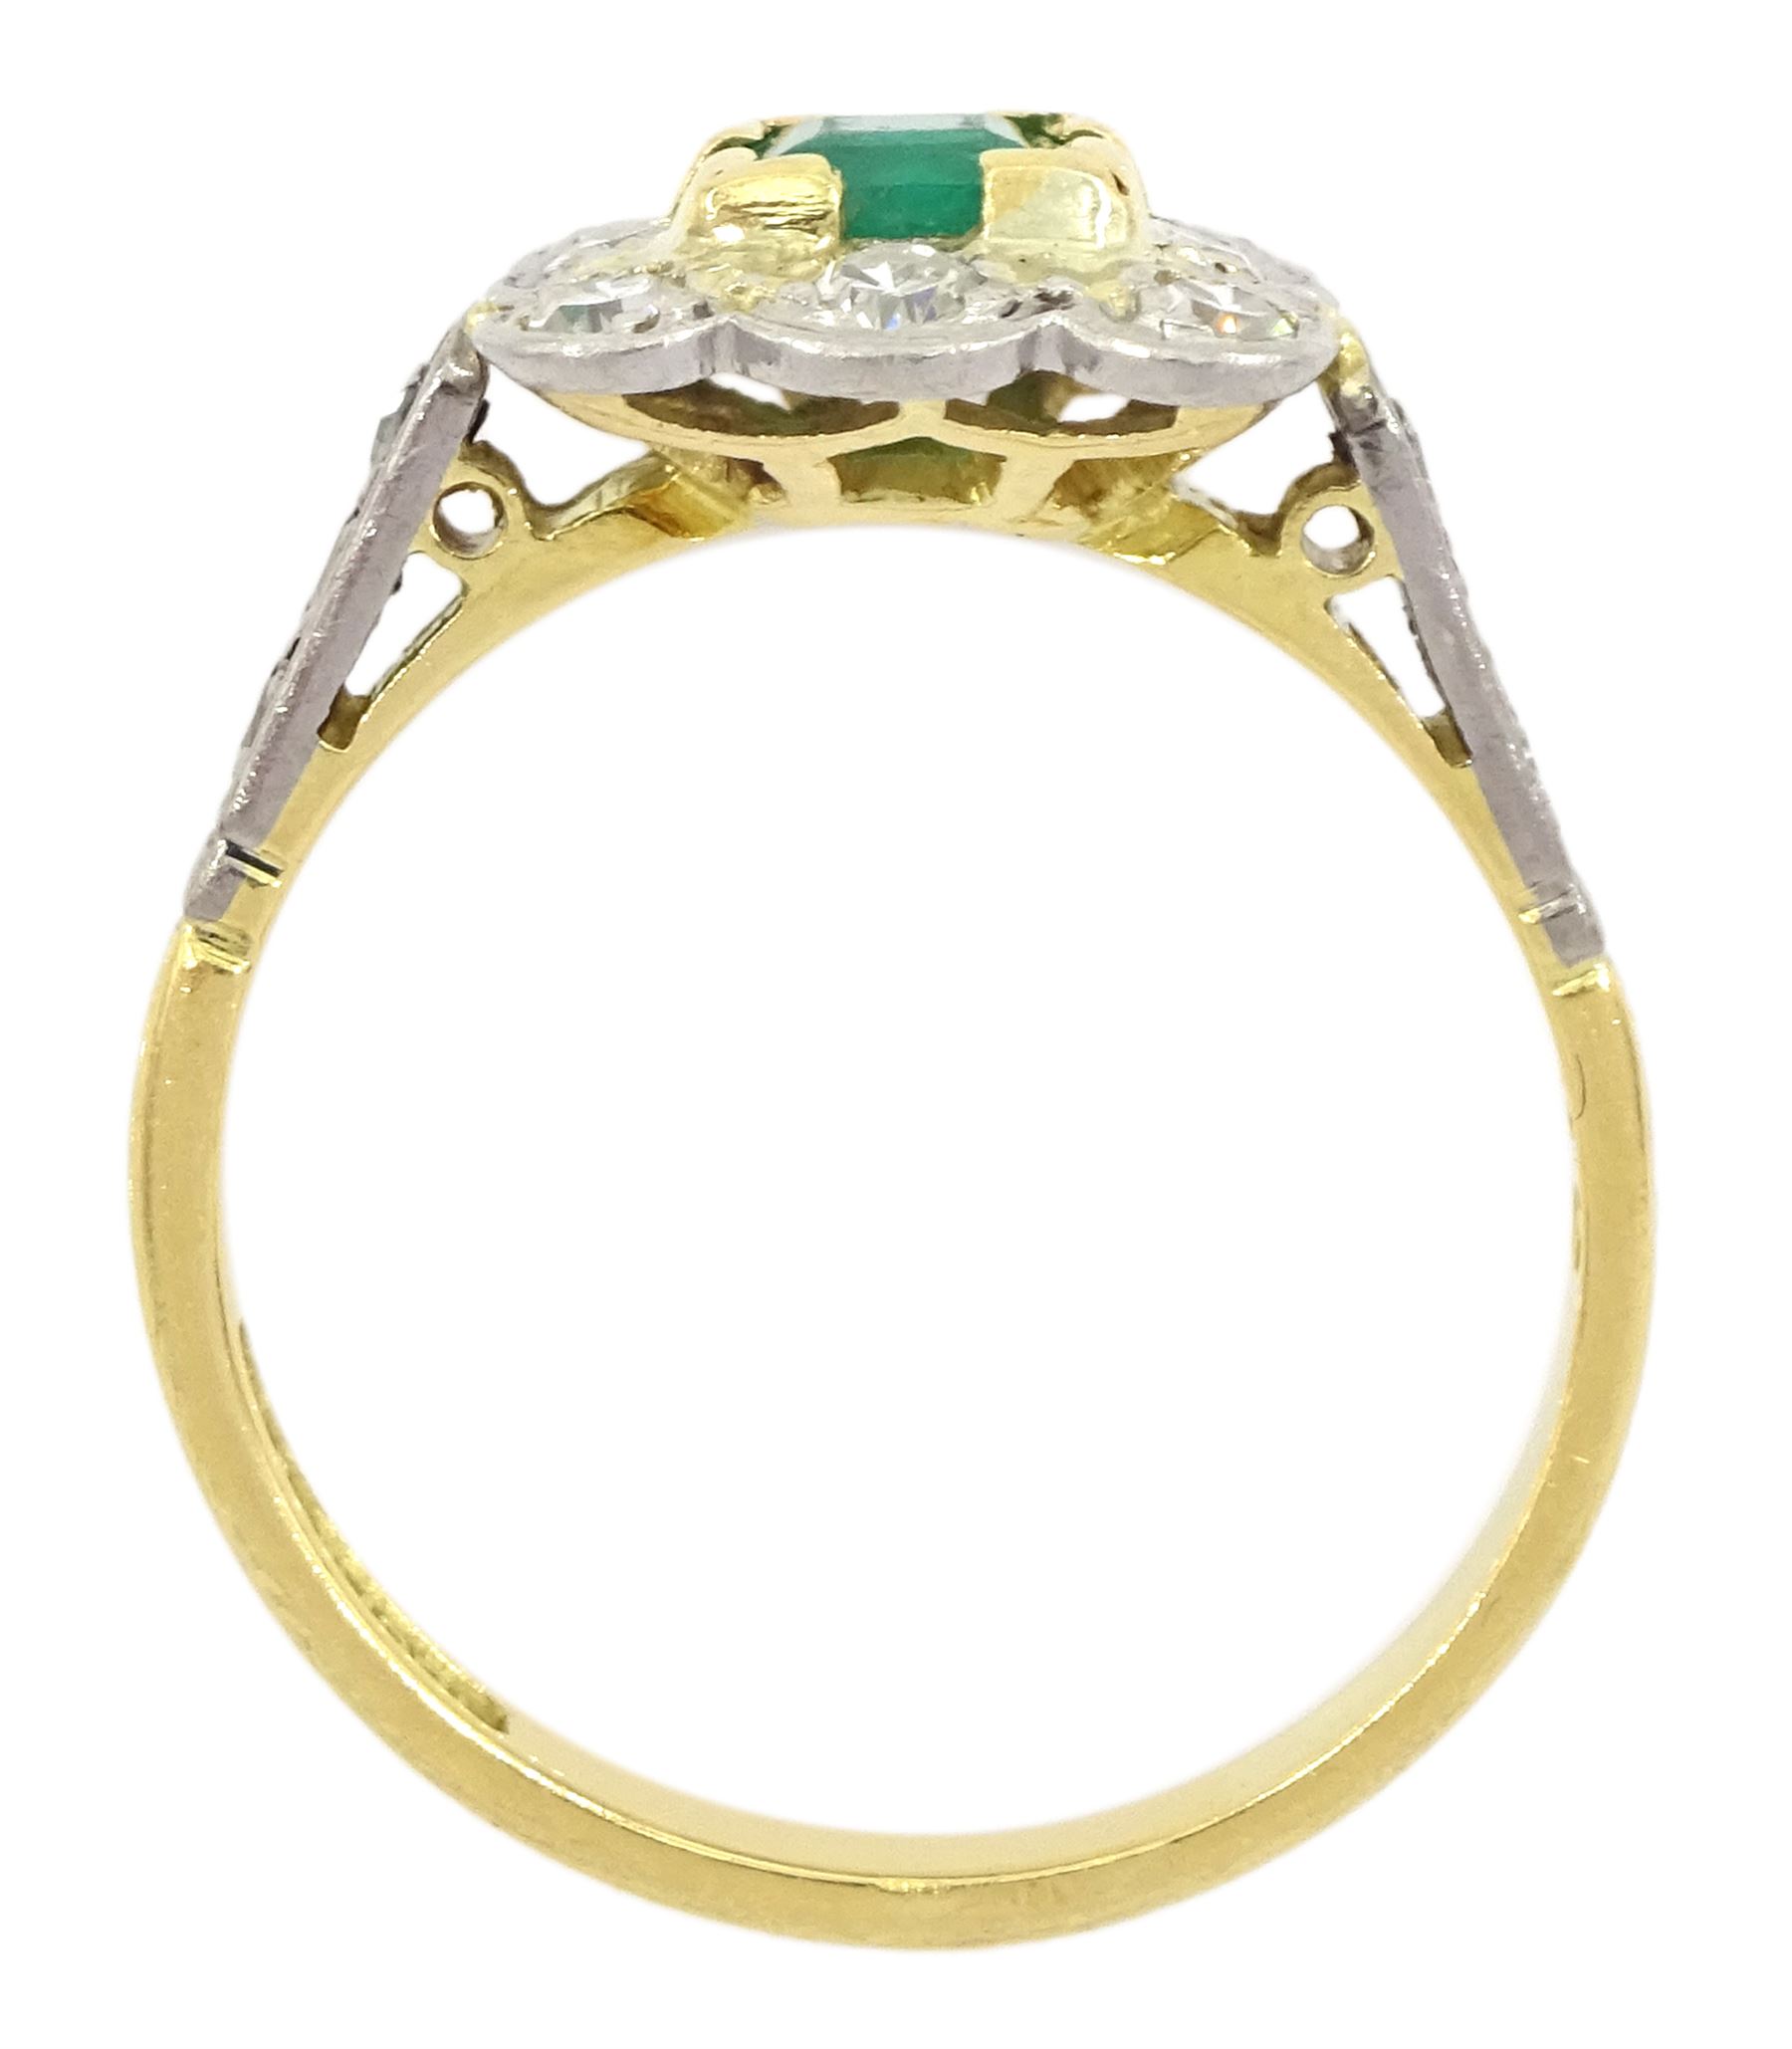 Gold square cut emerald and single cut diamond cluster ring - Image 4 of 4